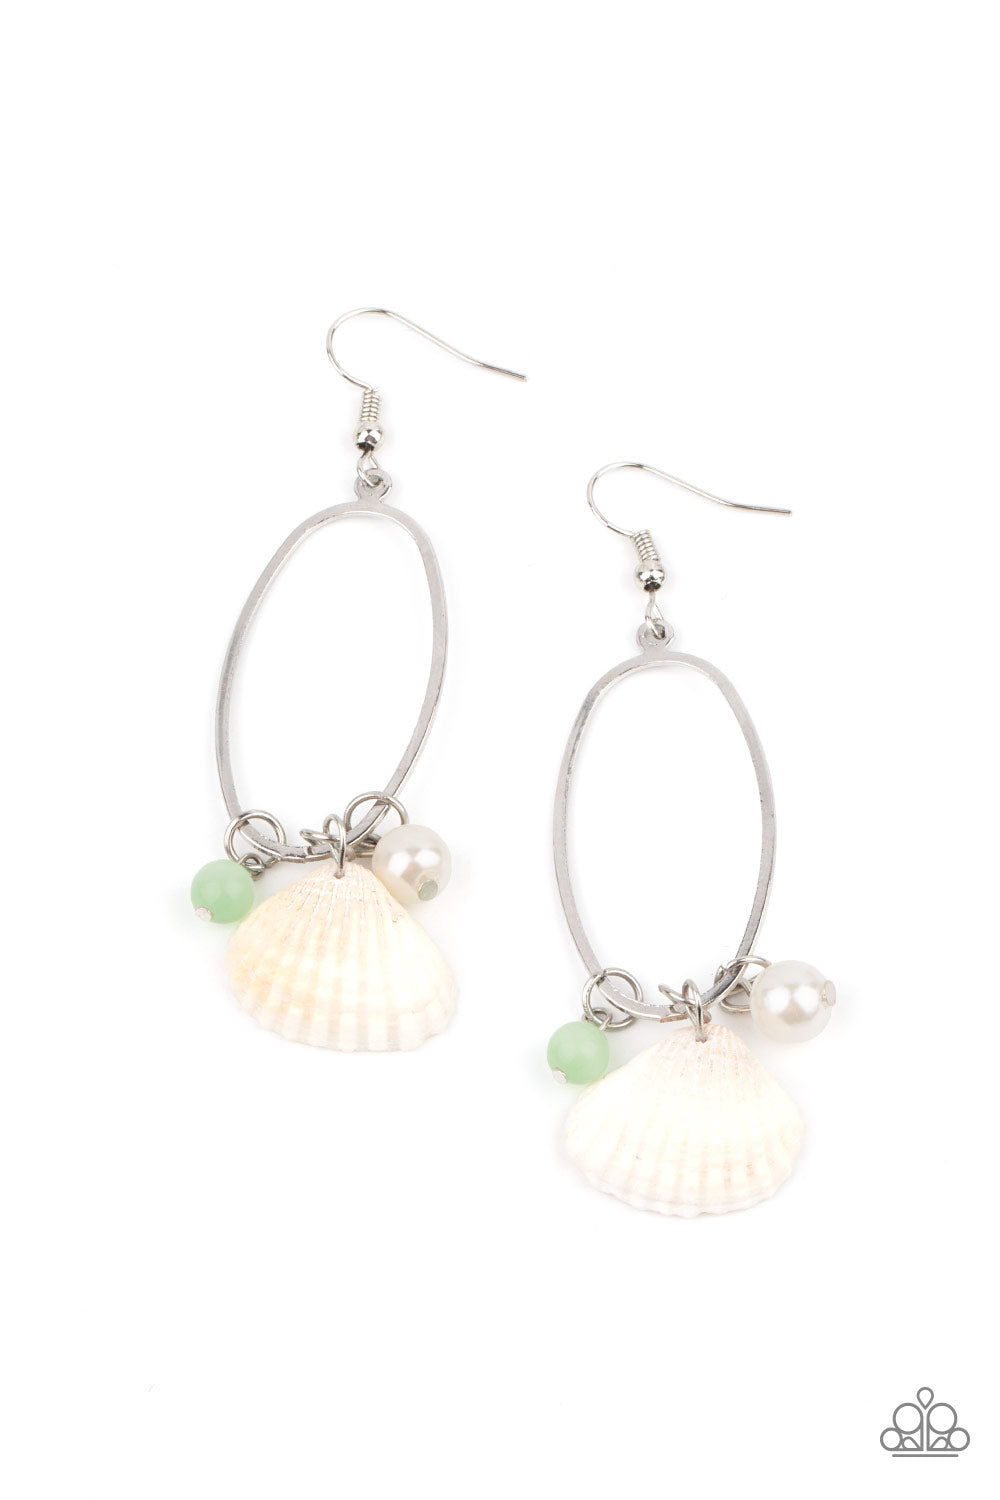 This Too SHELL Pass - Green Earrings - Princess Glam Shop